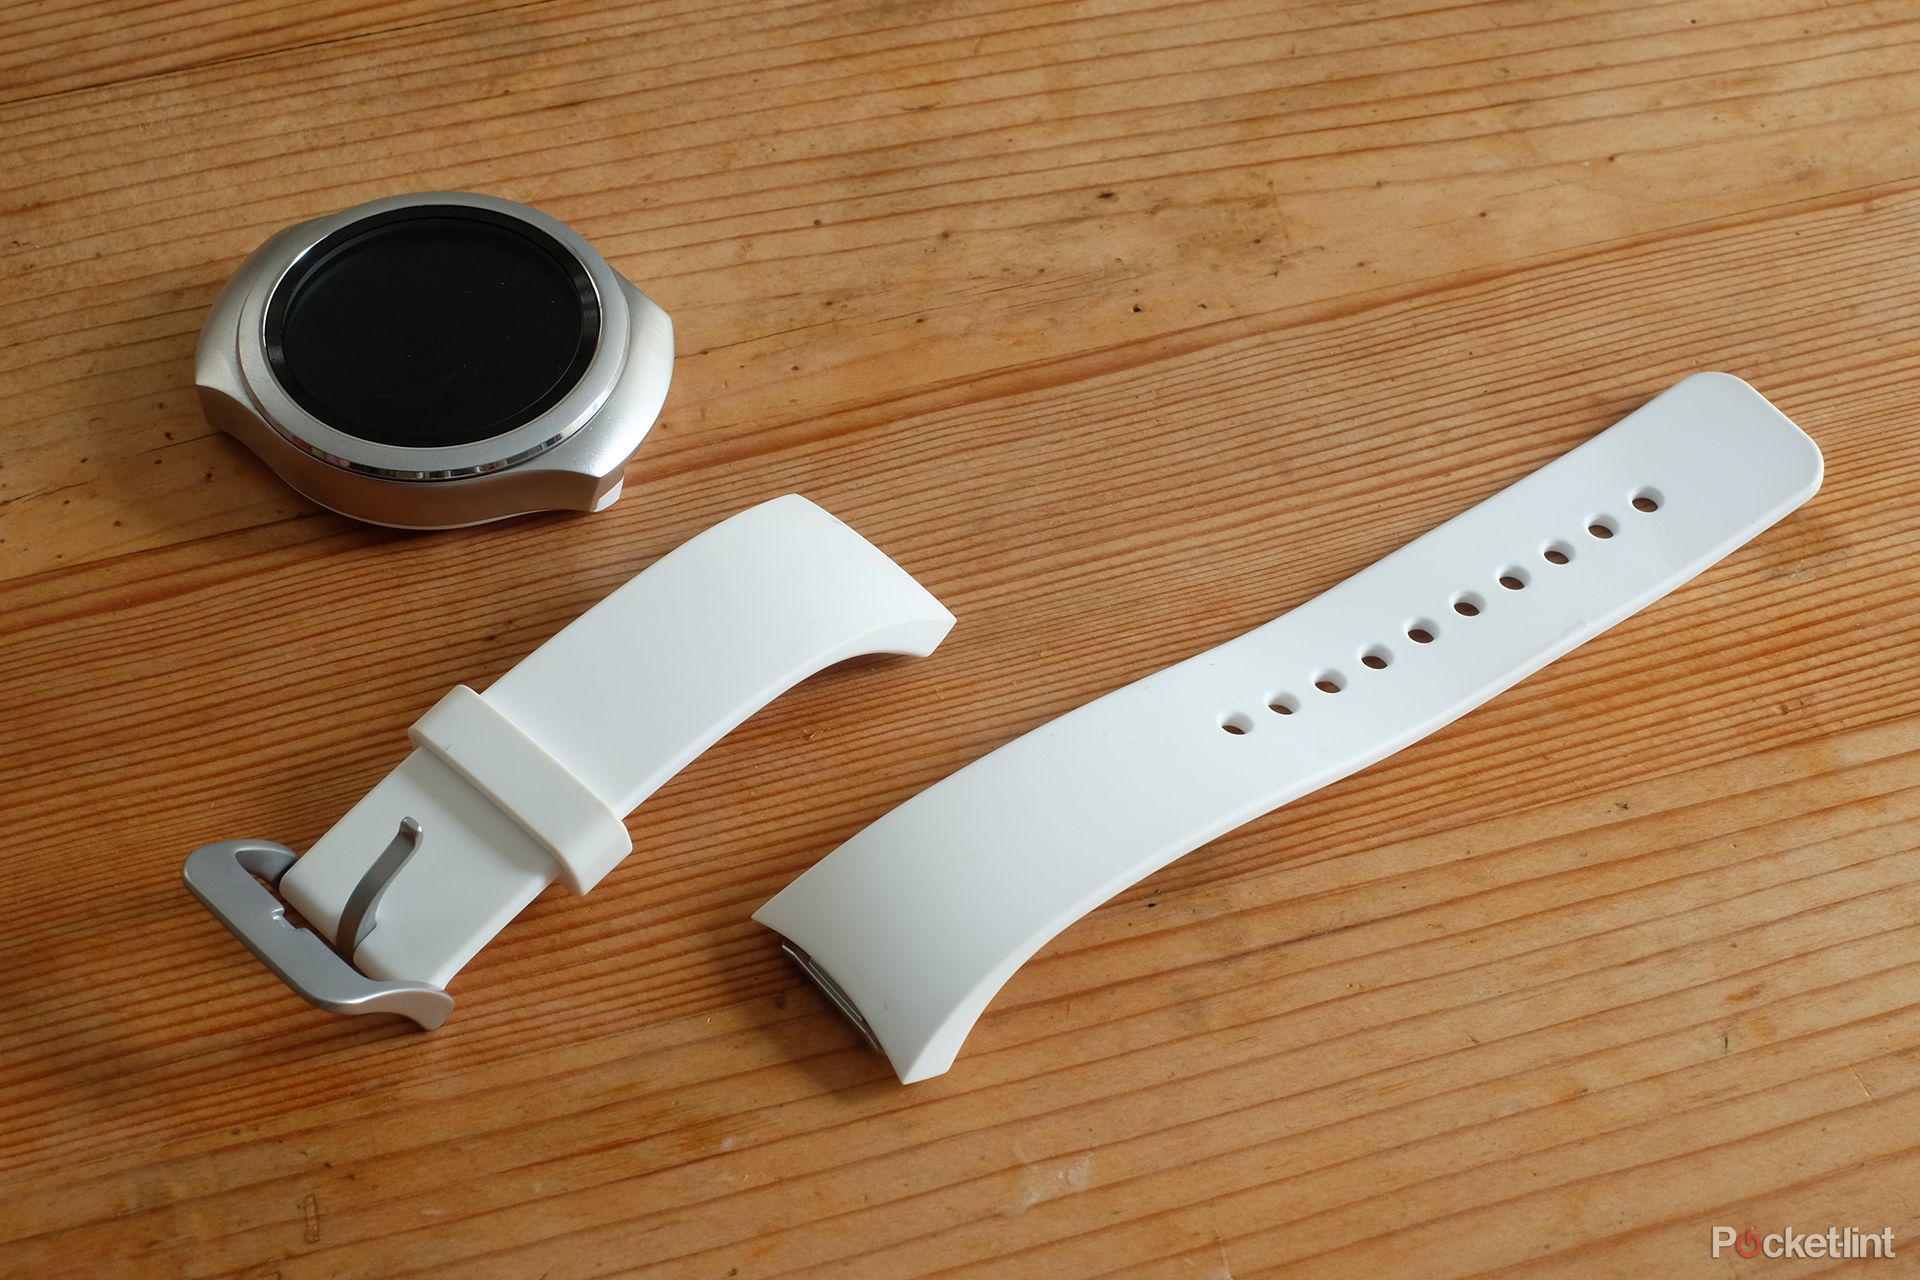 samsung gear s2 review image 2